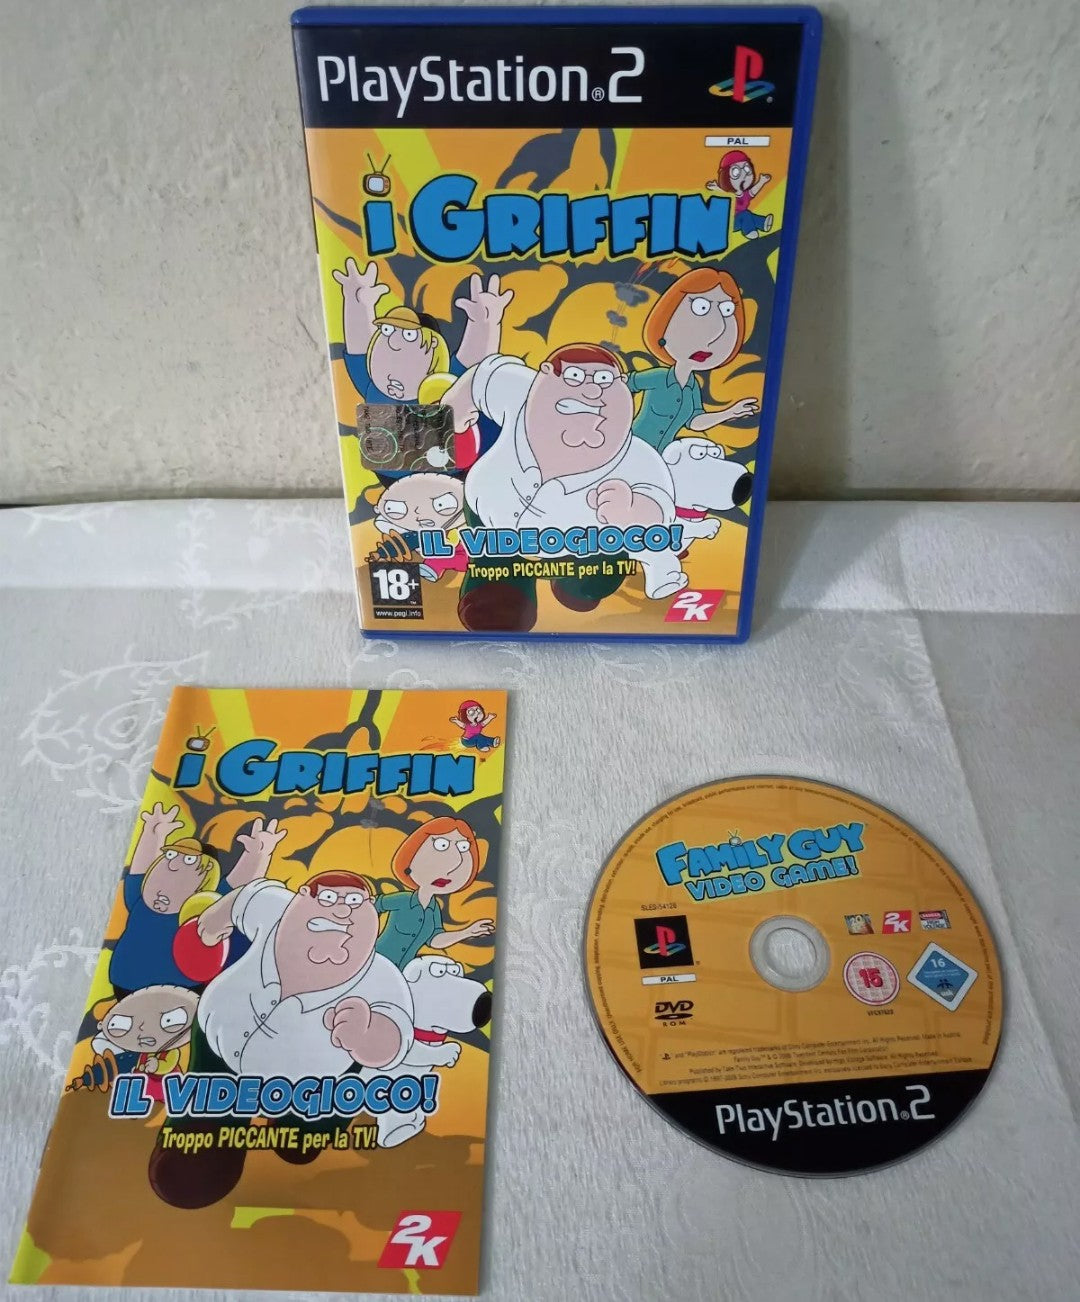 Griffin Video Game The Video Game for PlayStation 2